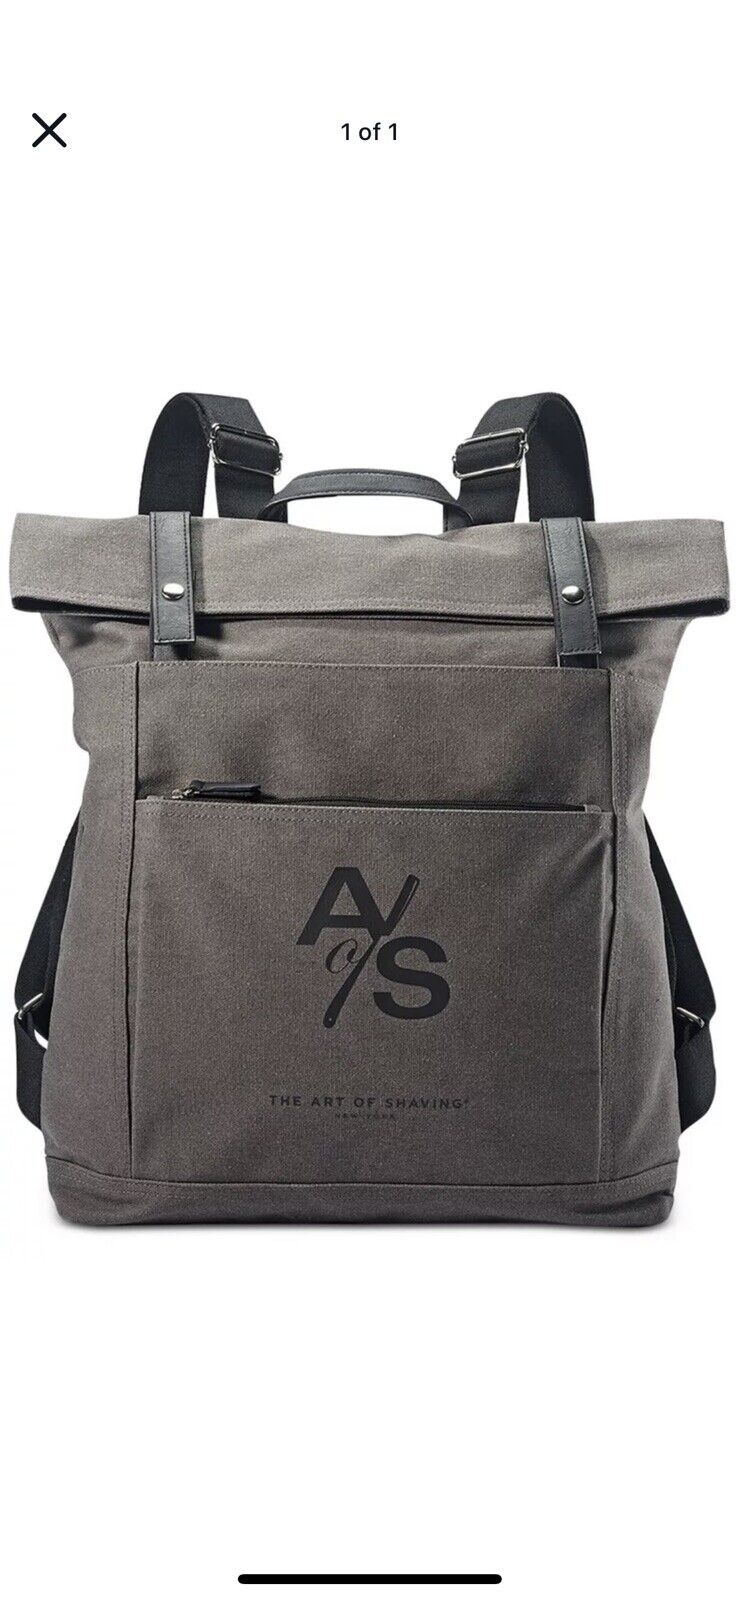 Large Travel Backpack by ART of SHAVING Authentic canvas gray big NEW W leather